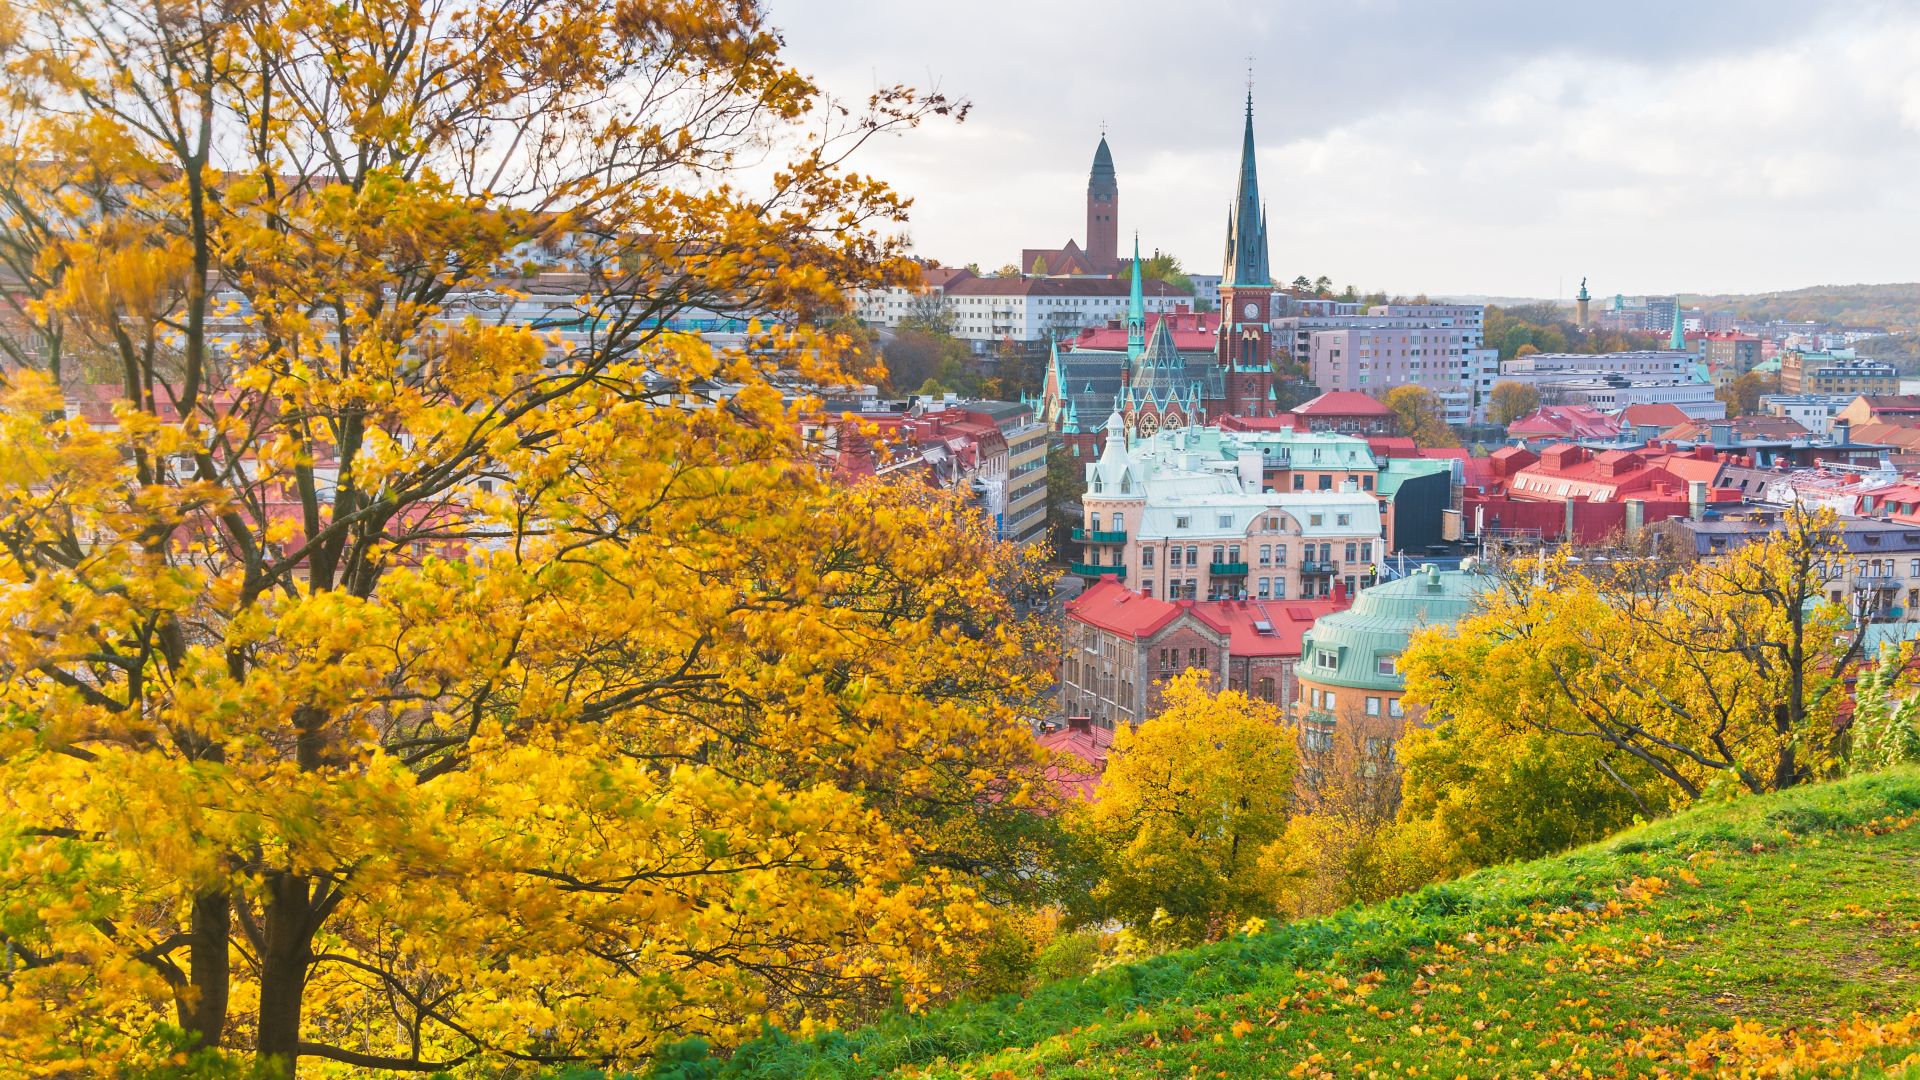 City of Gothenburg seen behind a hill in an autumn day